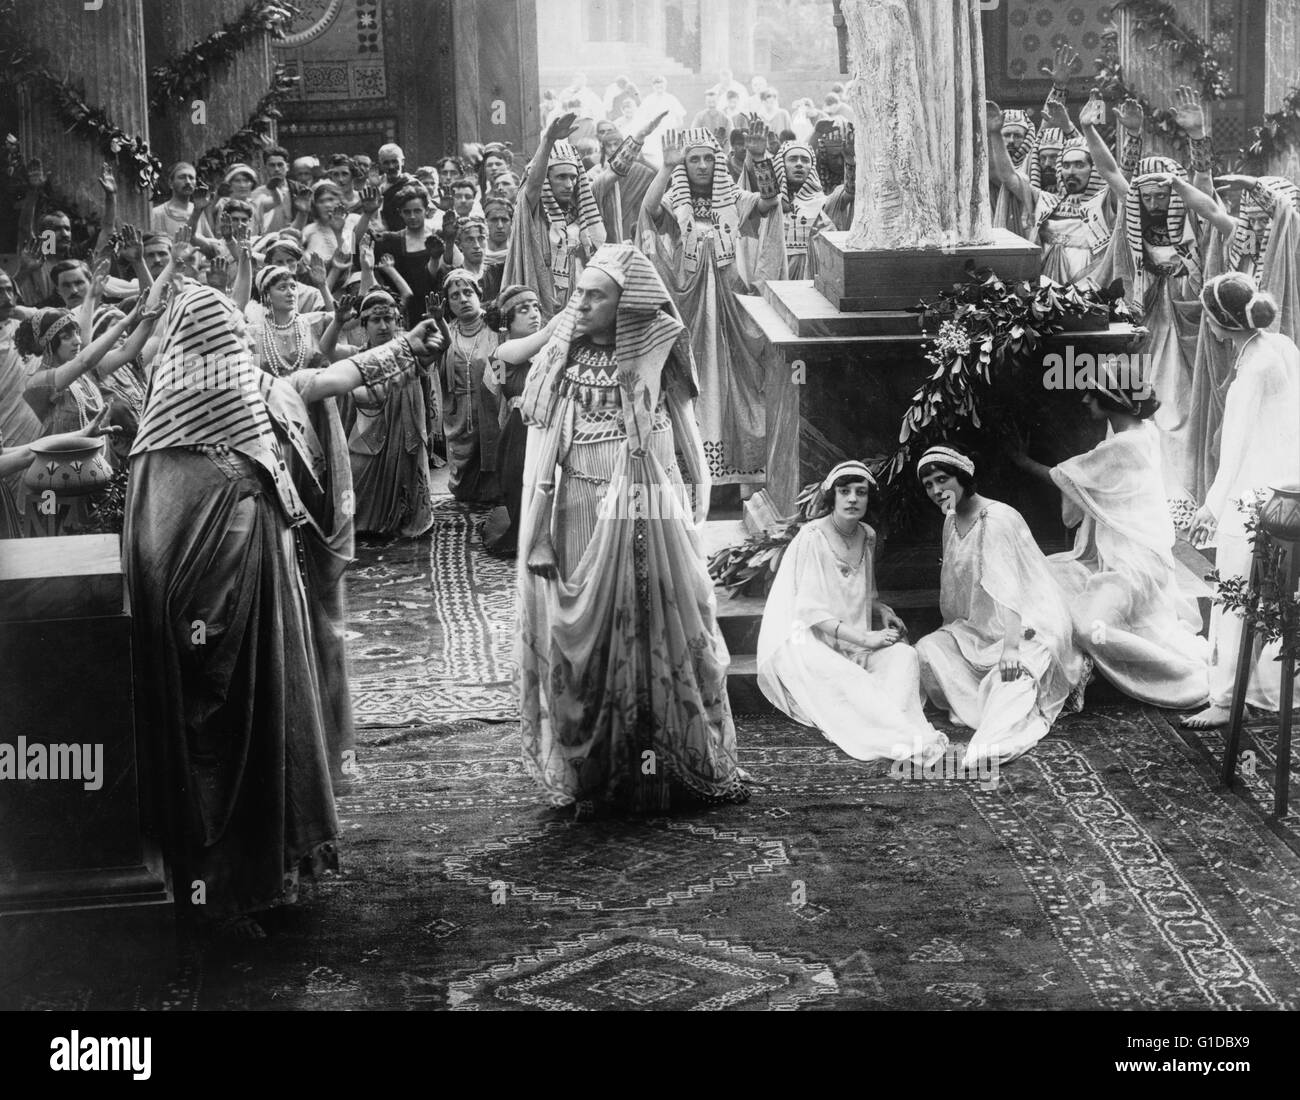 Scene from the silent film, The last days of Pompeii; 1913. Showing priests and citizens worshipping a statue. Directed by Mario Caserini Stock Photo